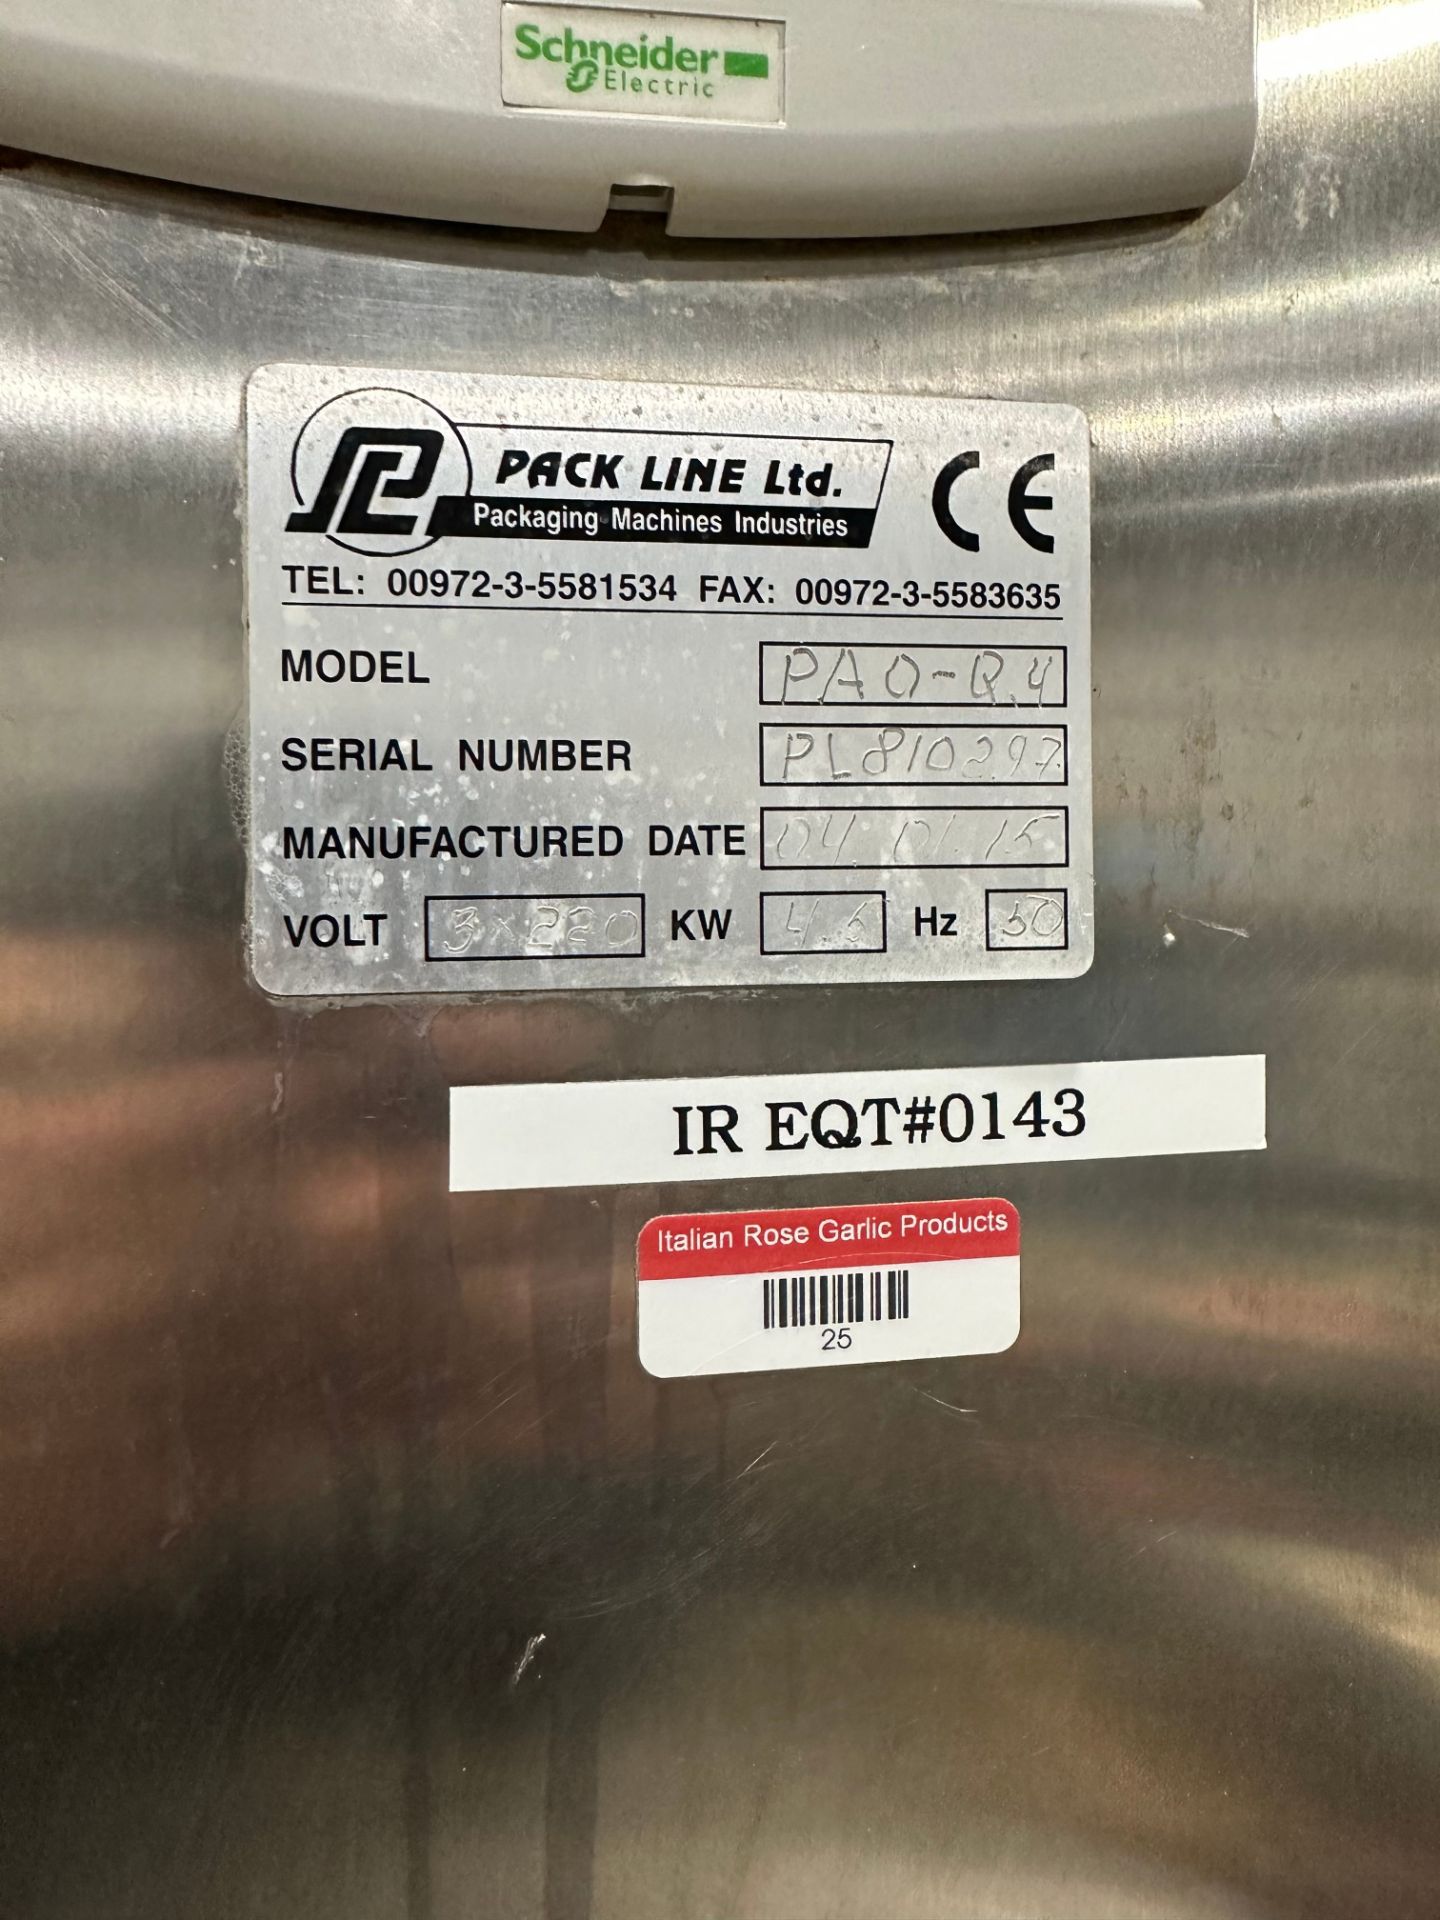 Pack Line Cup Filler, Model PAO-Q4, S/N PL810297, Volt 3 x 220 -- Capable of 1 oz. to 6 oz. - Image 9 of 9